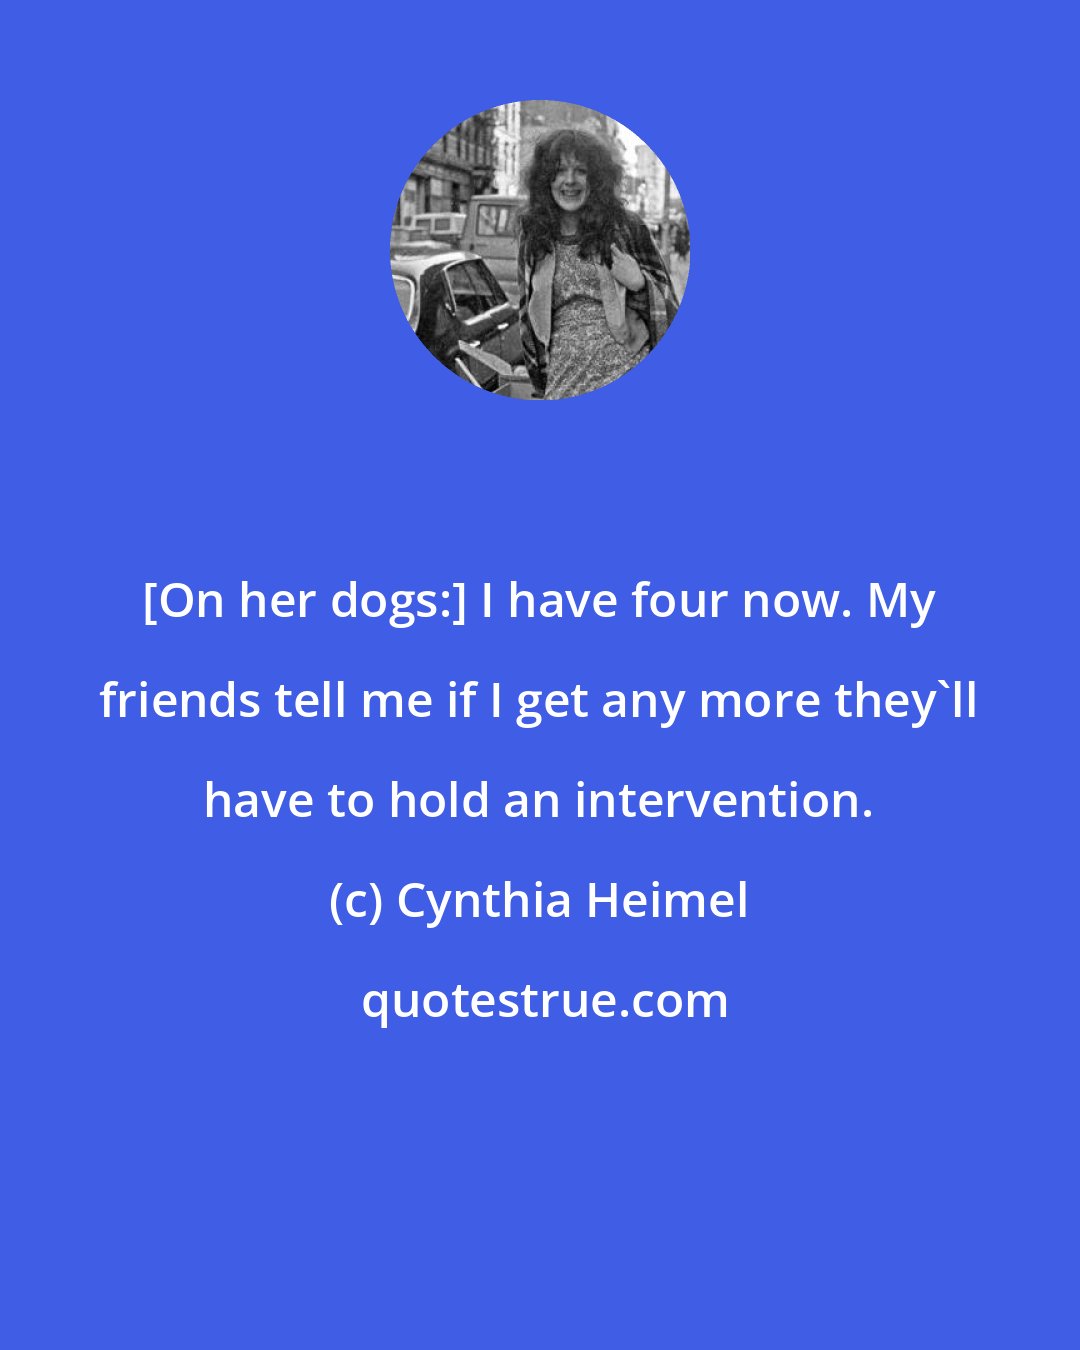 Cynthia Heimel: [On her dogs:] I have four now. My friends tell me if I get any more they'll have to hold an intervention.